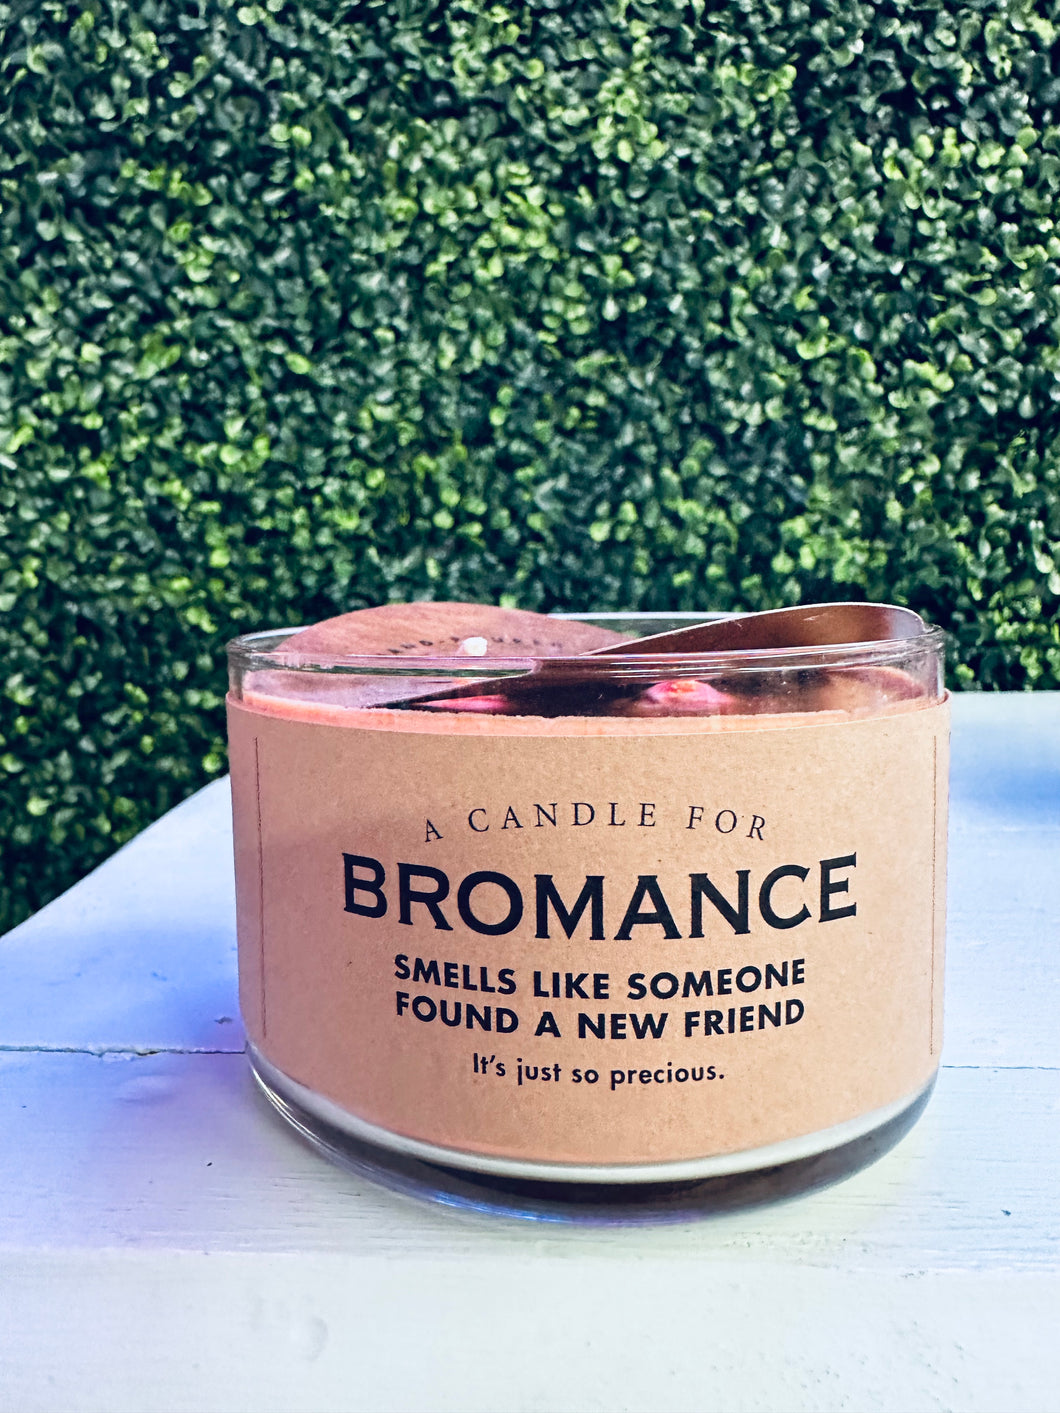 Bromance Candle by Whiskey River Soap Co.